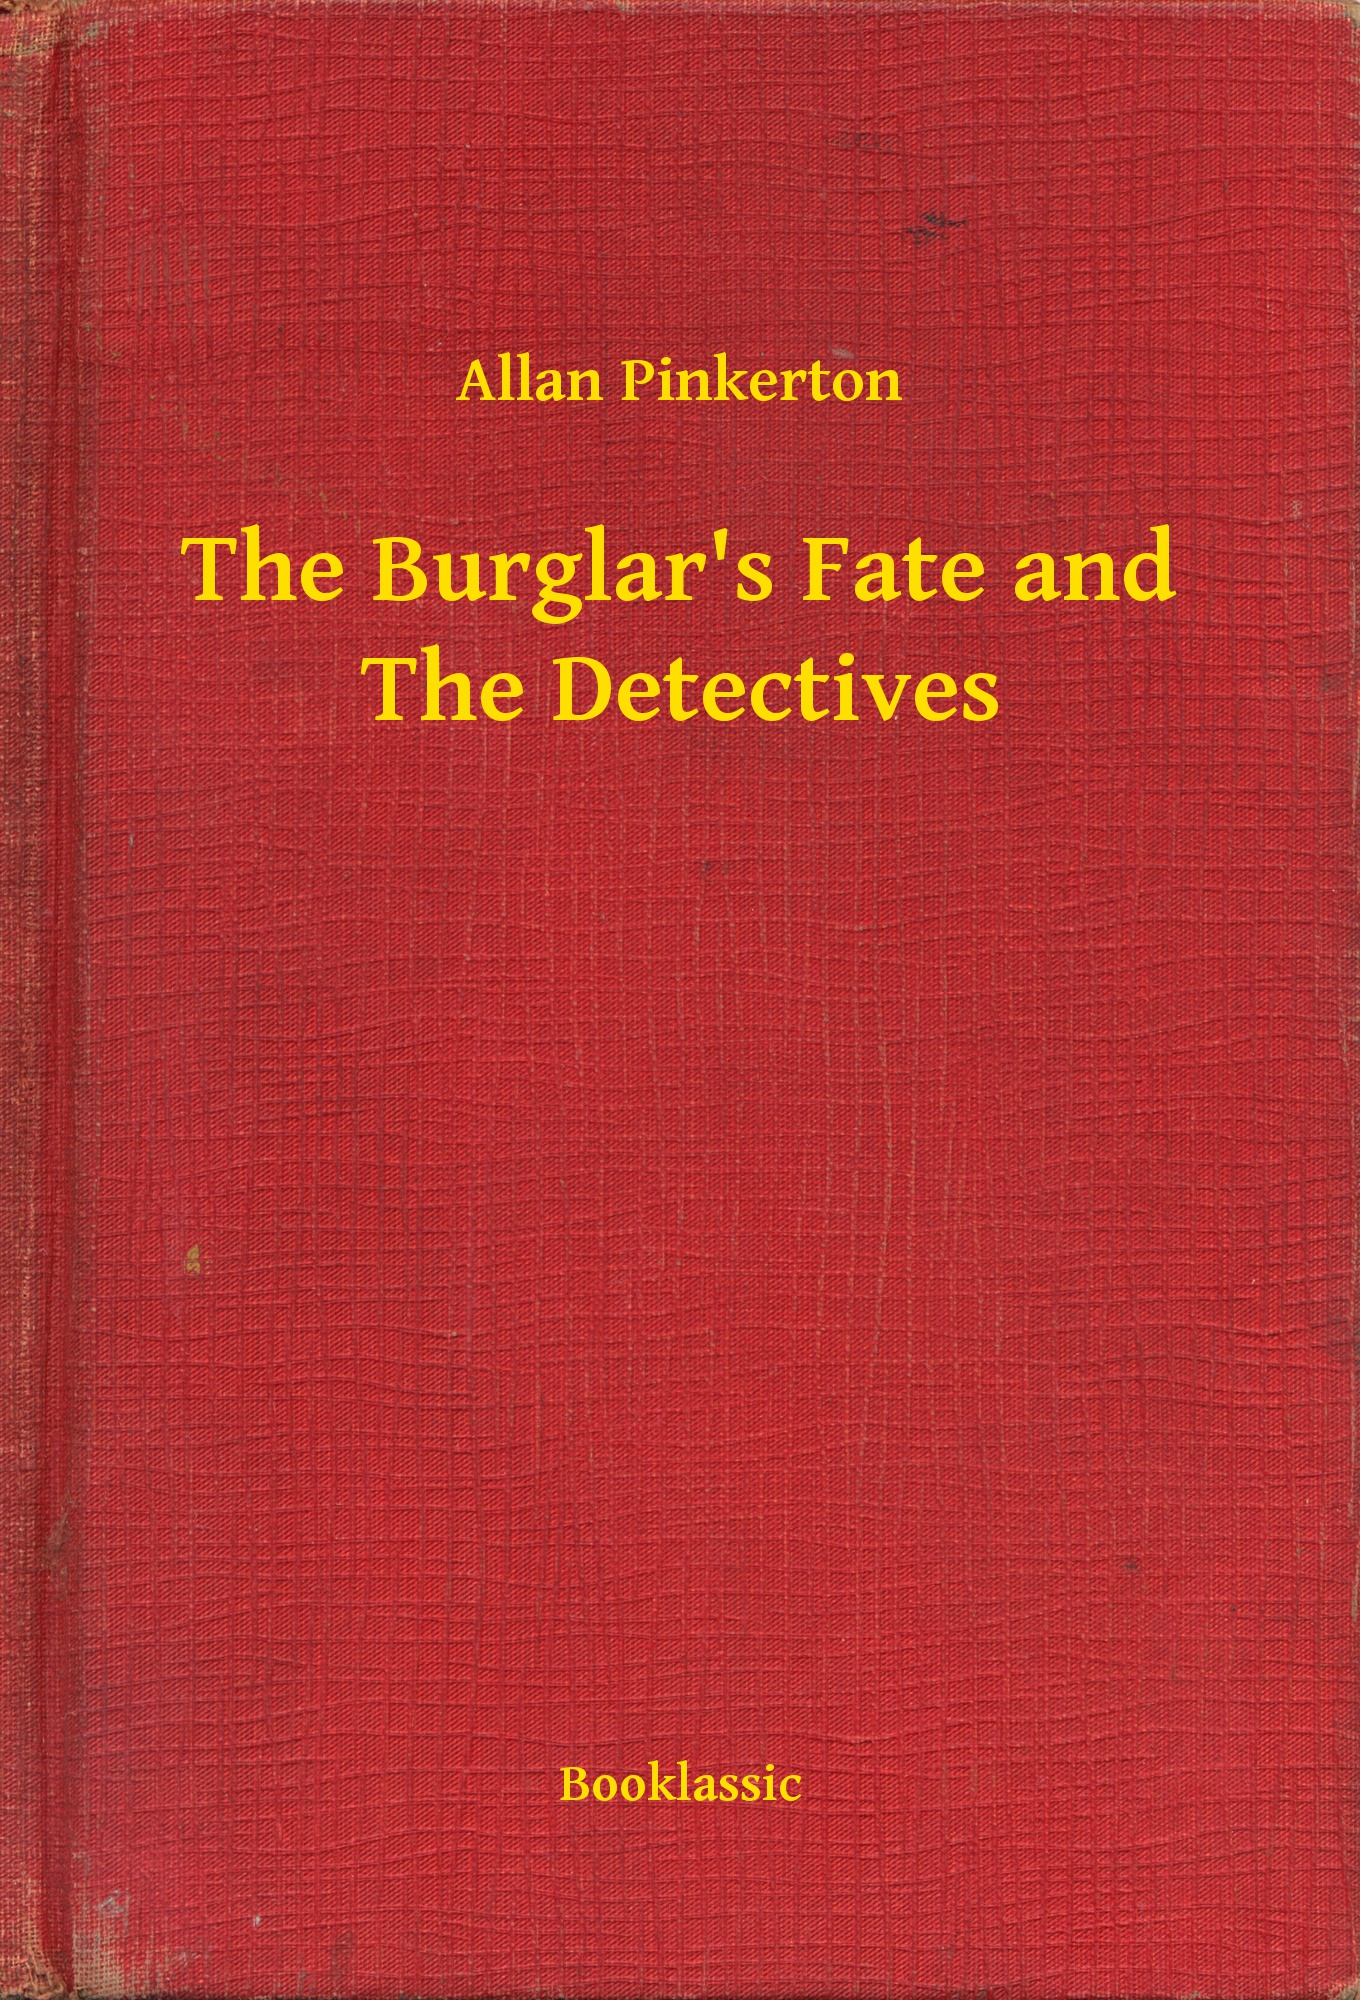 The Burglar"s Fate and The Detectives